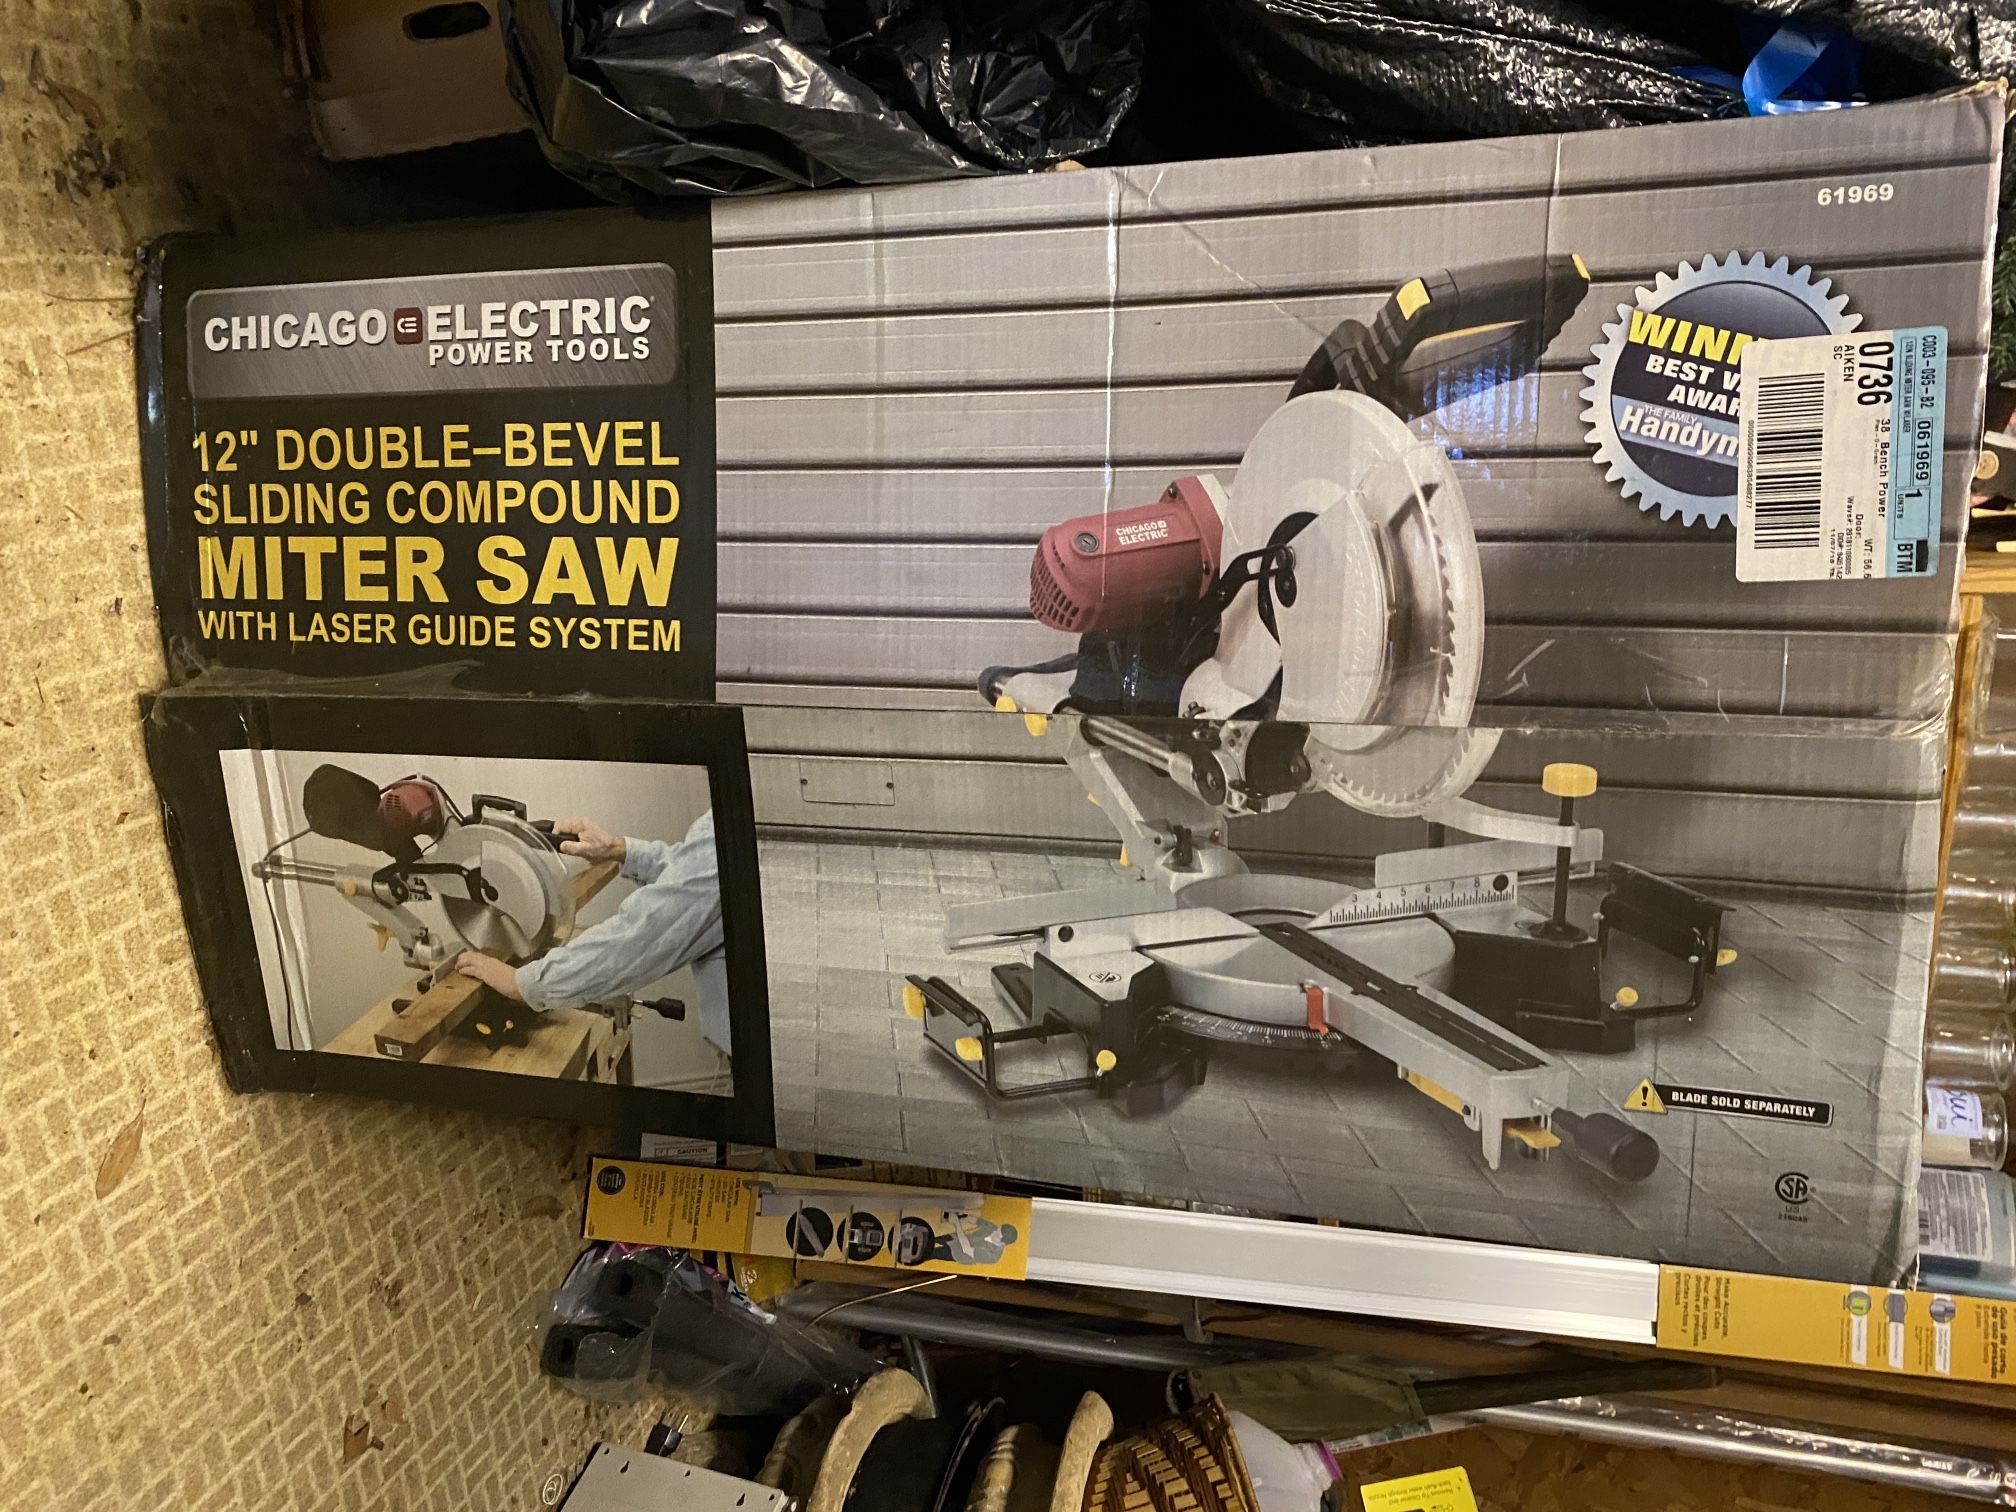 Chicago Electric Power Tool 12” Double Bevel Sliding Compound Miter Saw With Laser Guide System